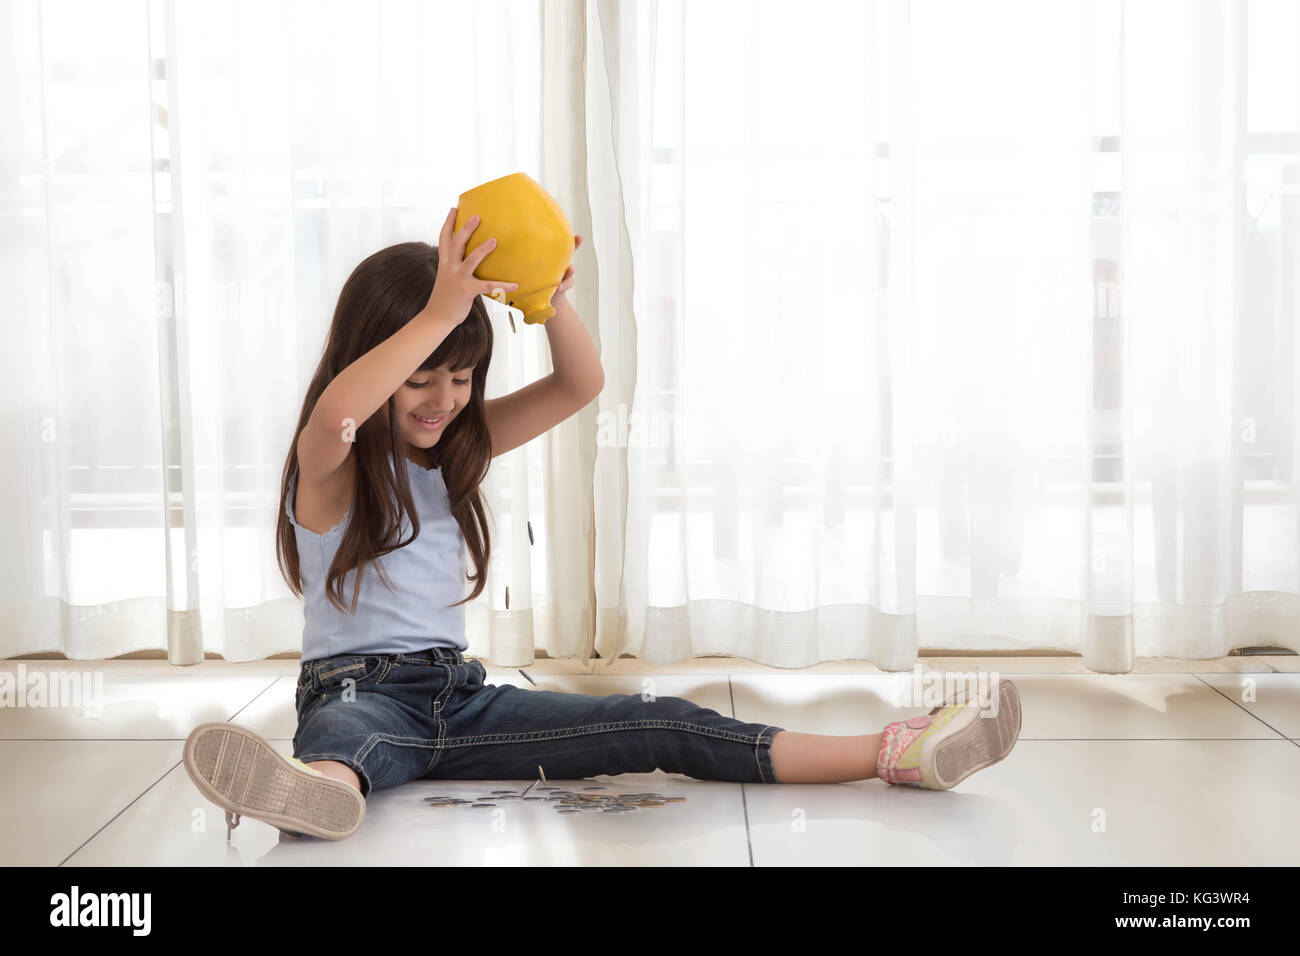 Excited girl emptying coins from piggy bank Stock Photo